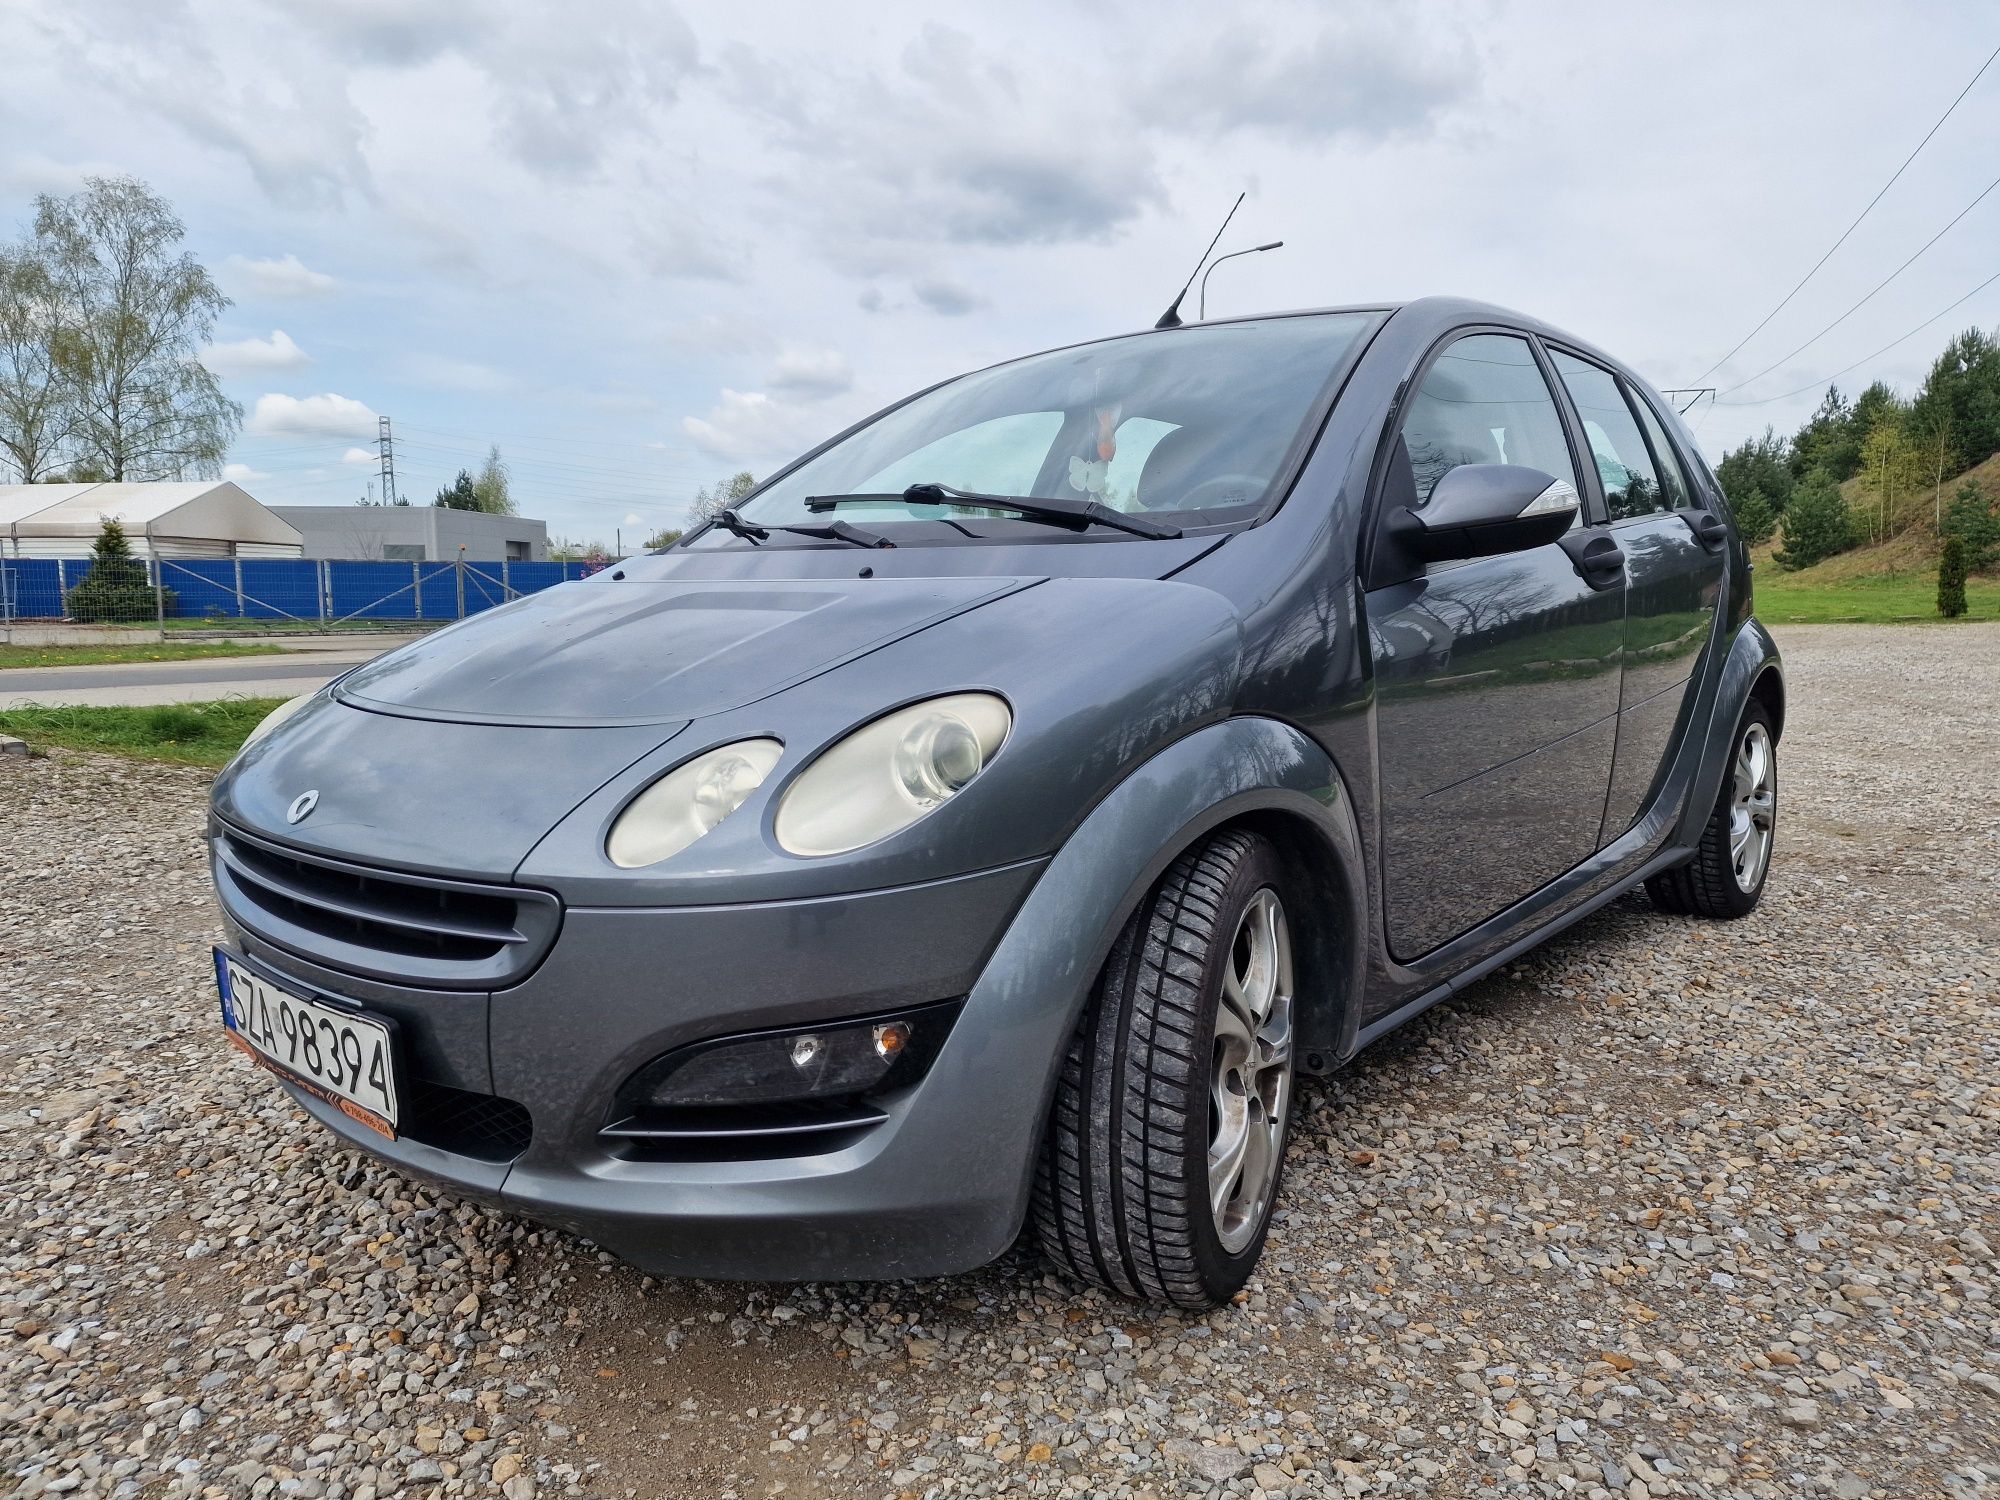 Smart ForFour 1.5cdi